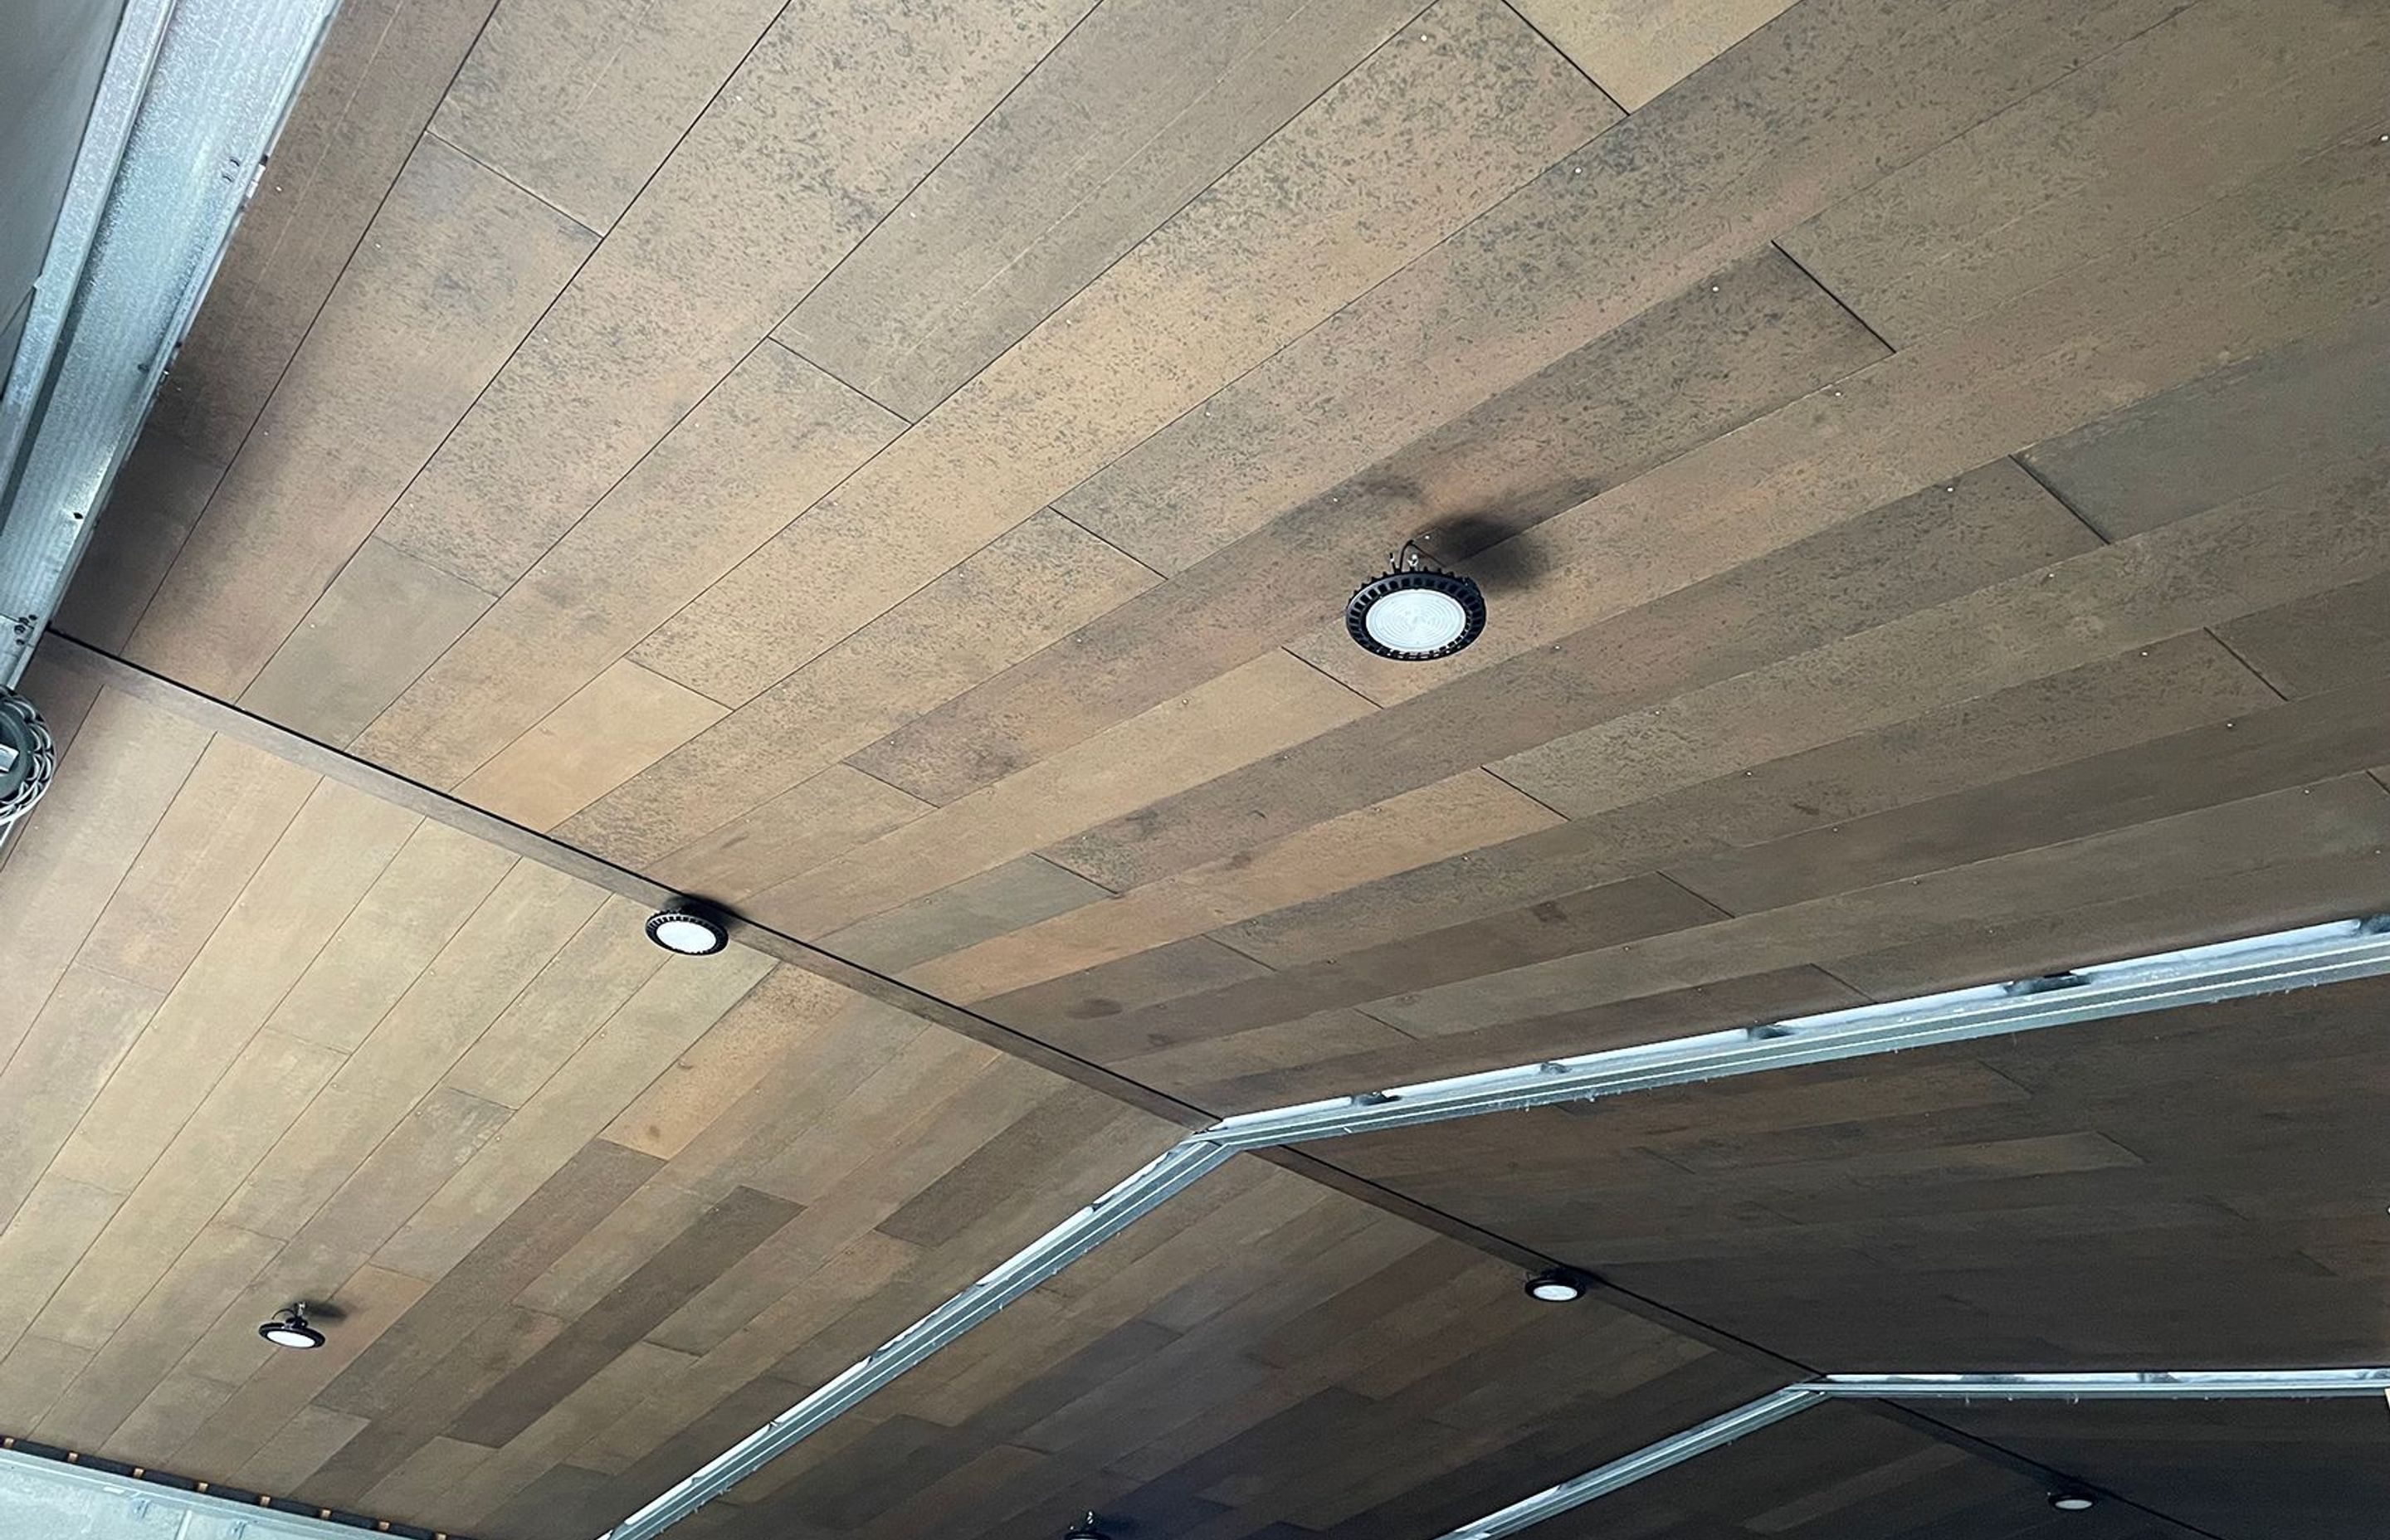 This shed ceiling Triboard TGV lining was stained with WOCA oils, giving it a leather look.